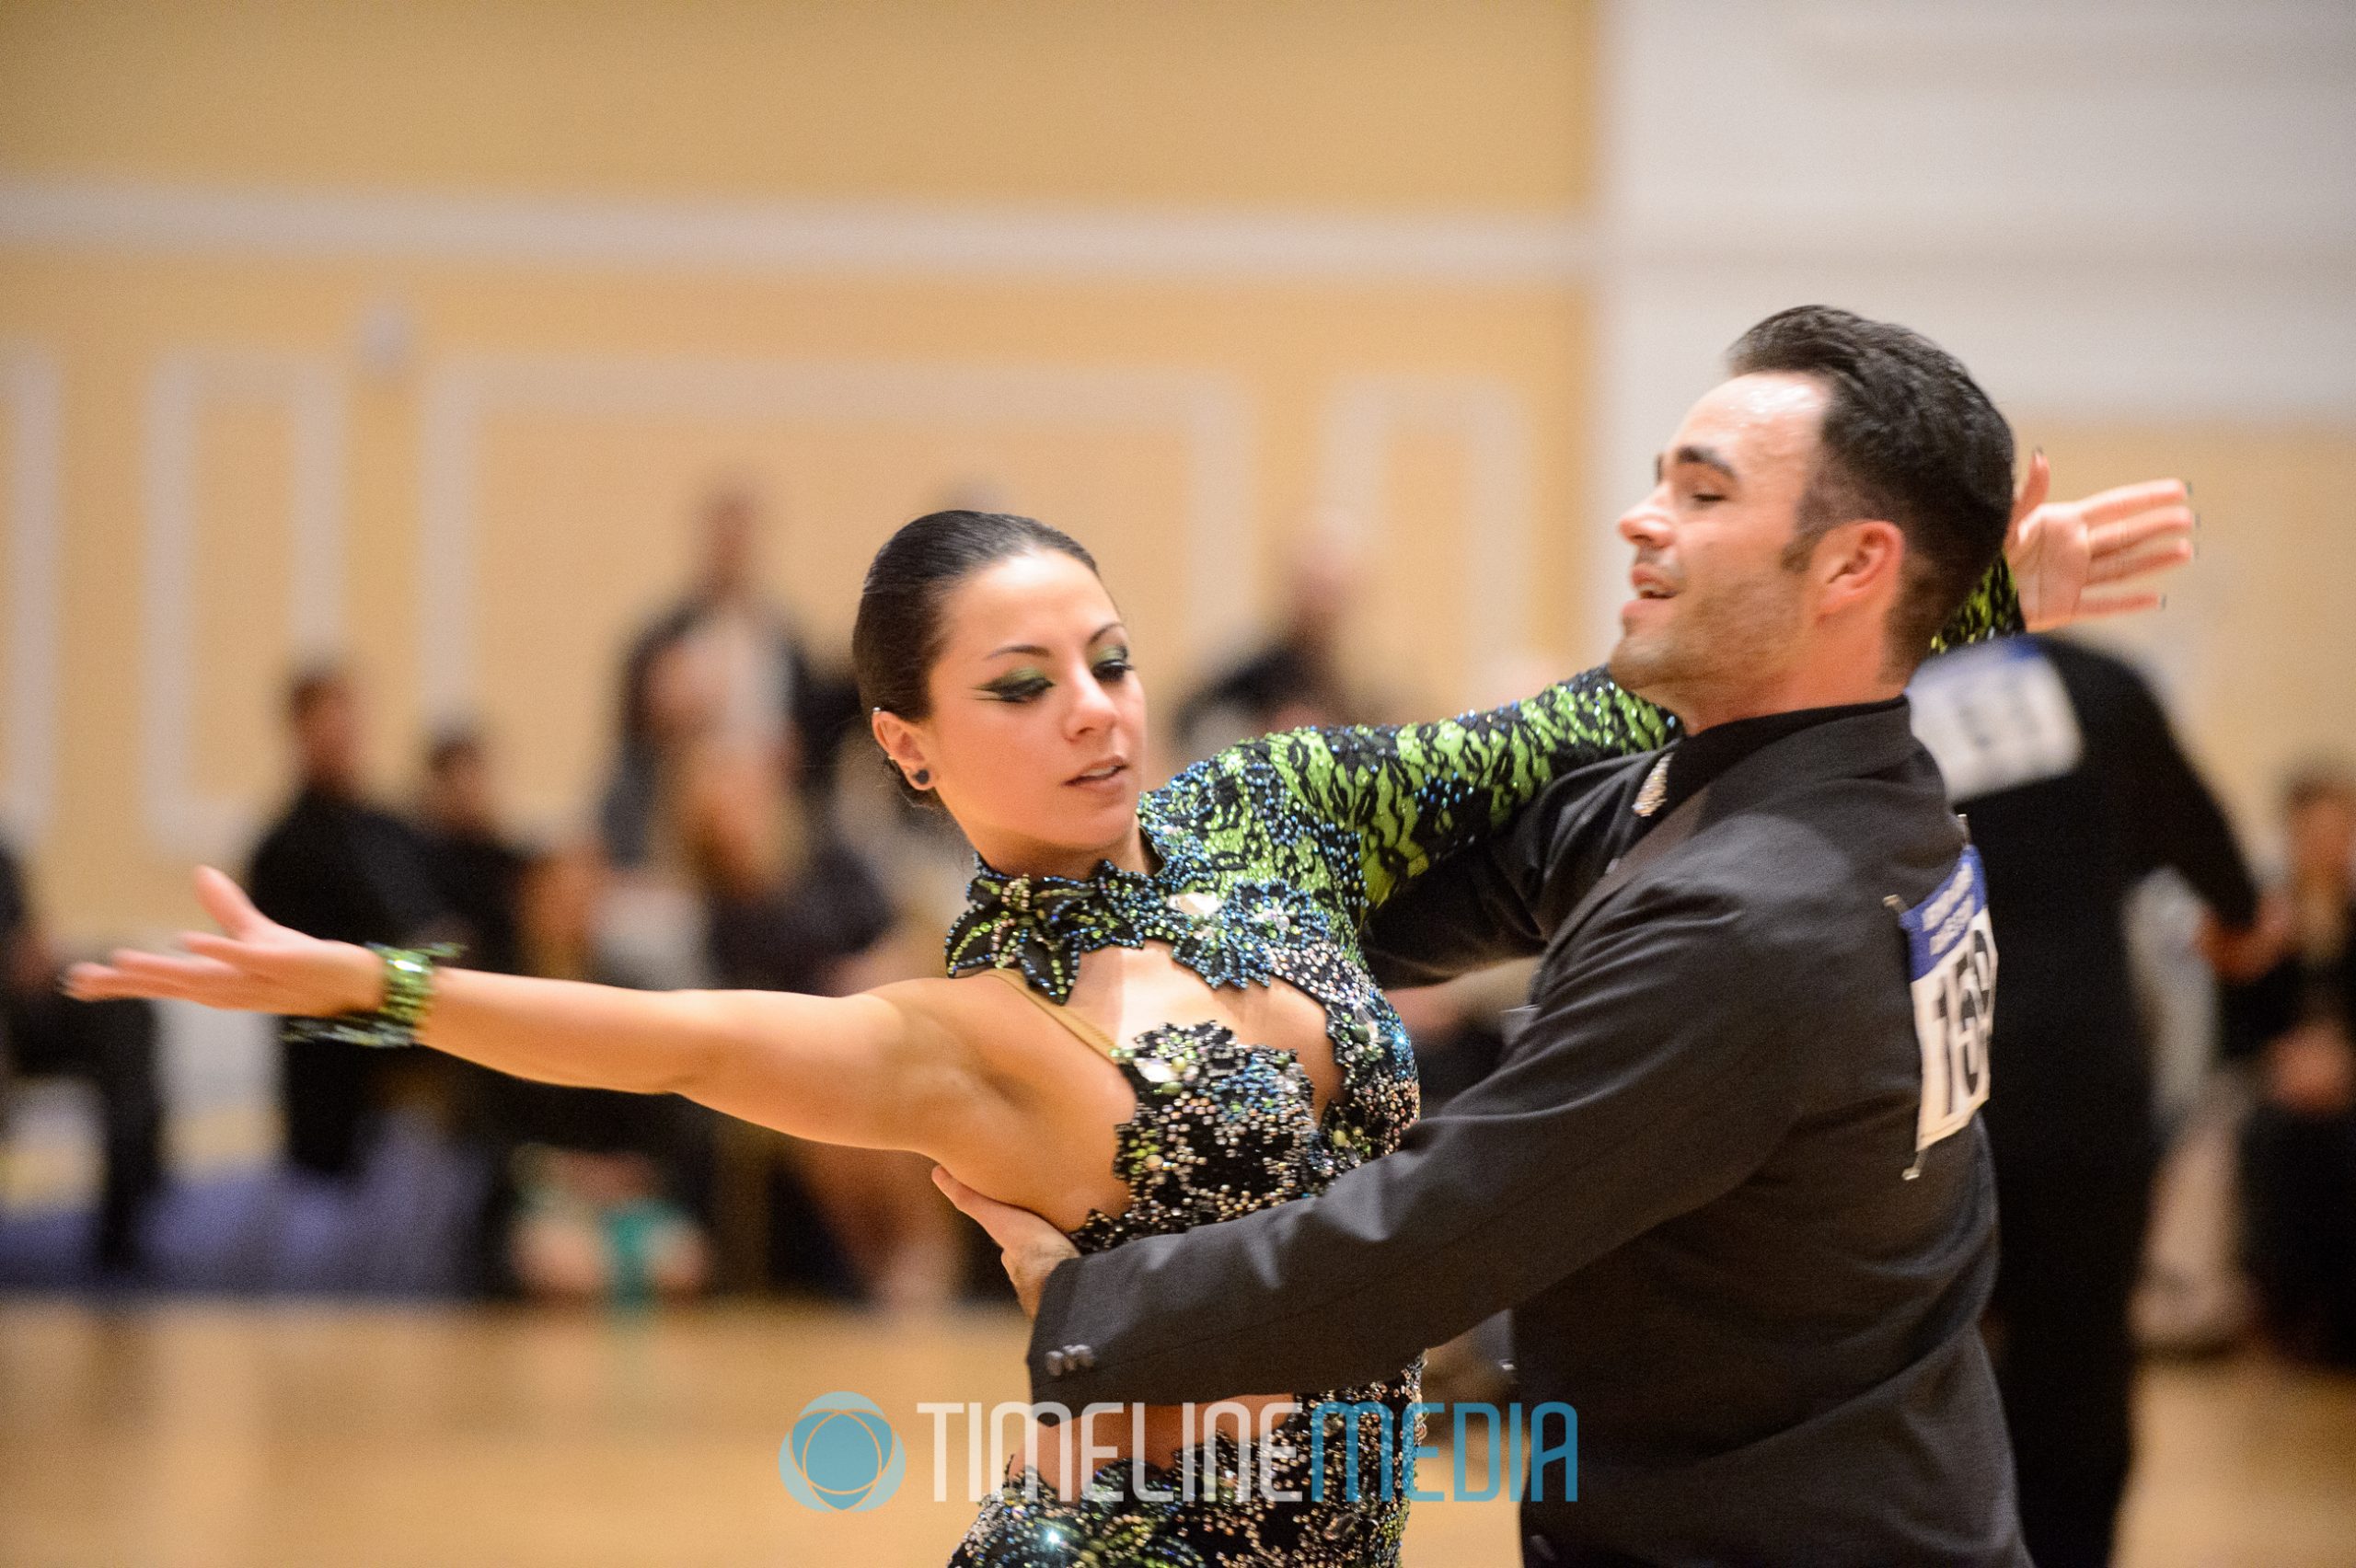 Maryland Arthur Murray professional competing at the National Dance-o-rama ©TimeLine Media